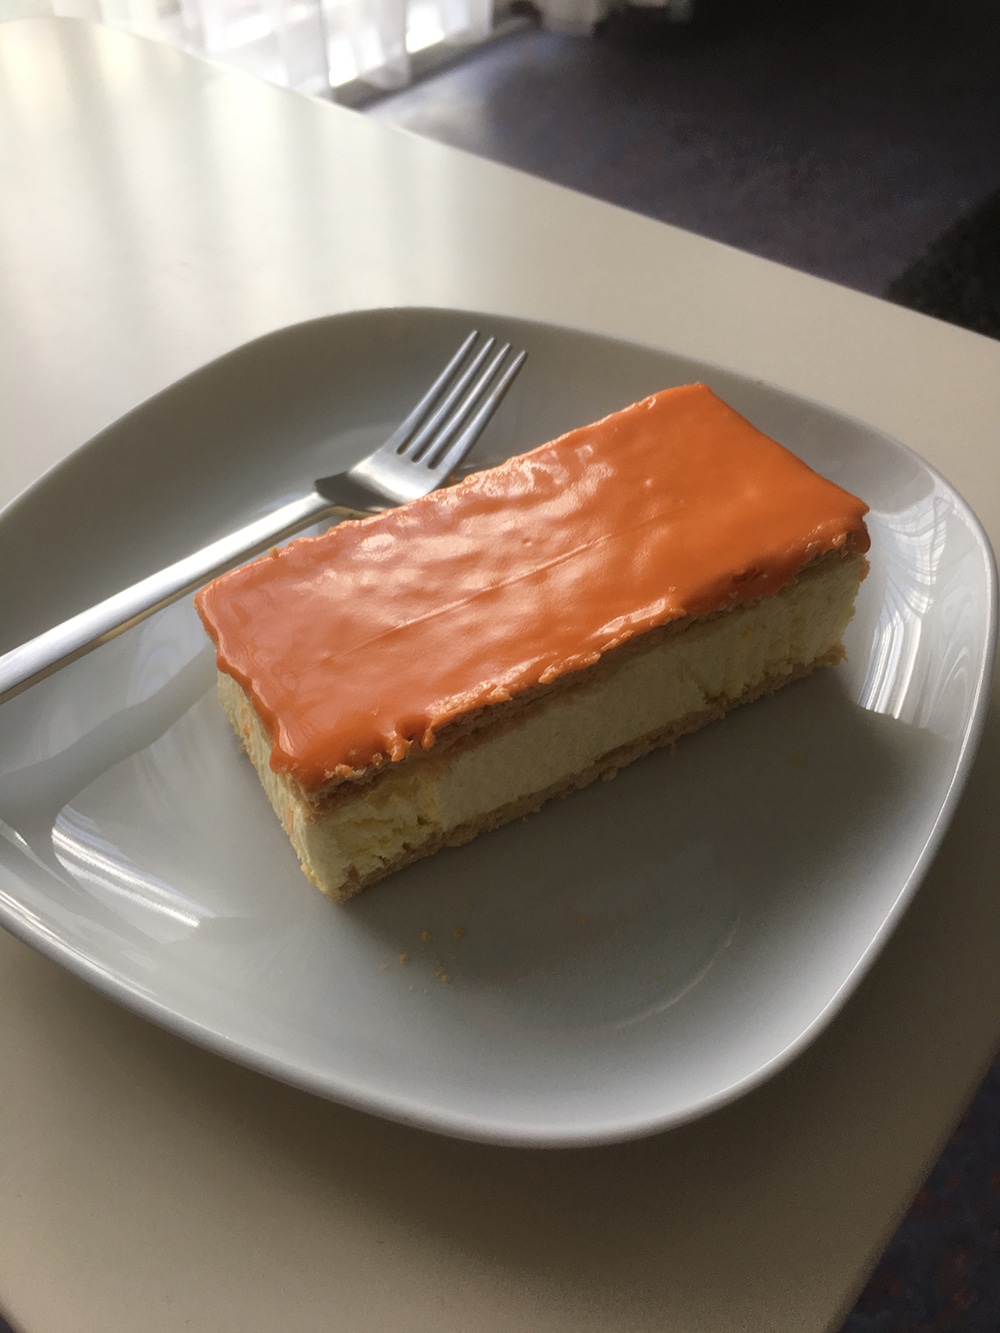 An orange tompouce, a typical Kings Day treat in The Netherlands